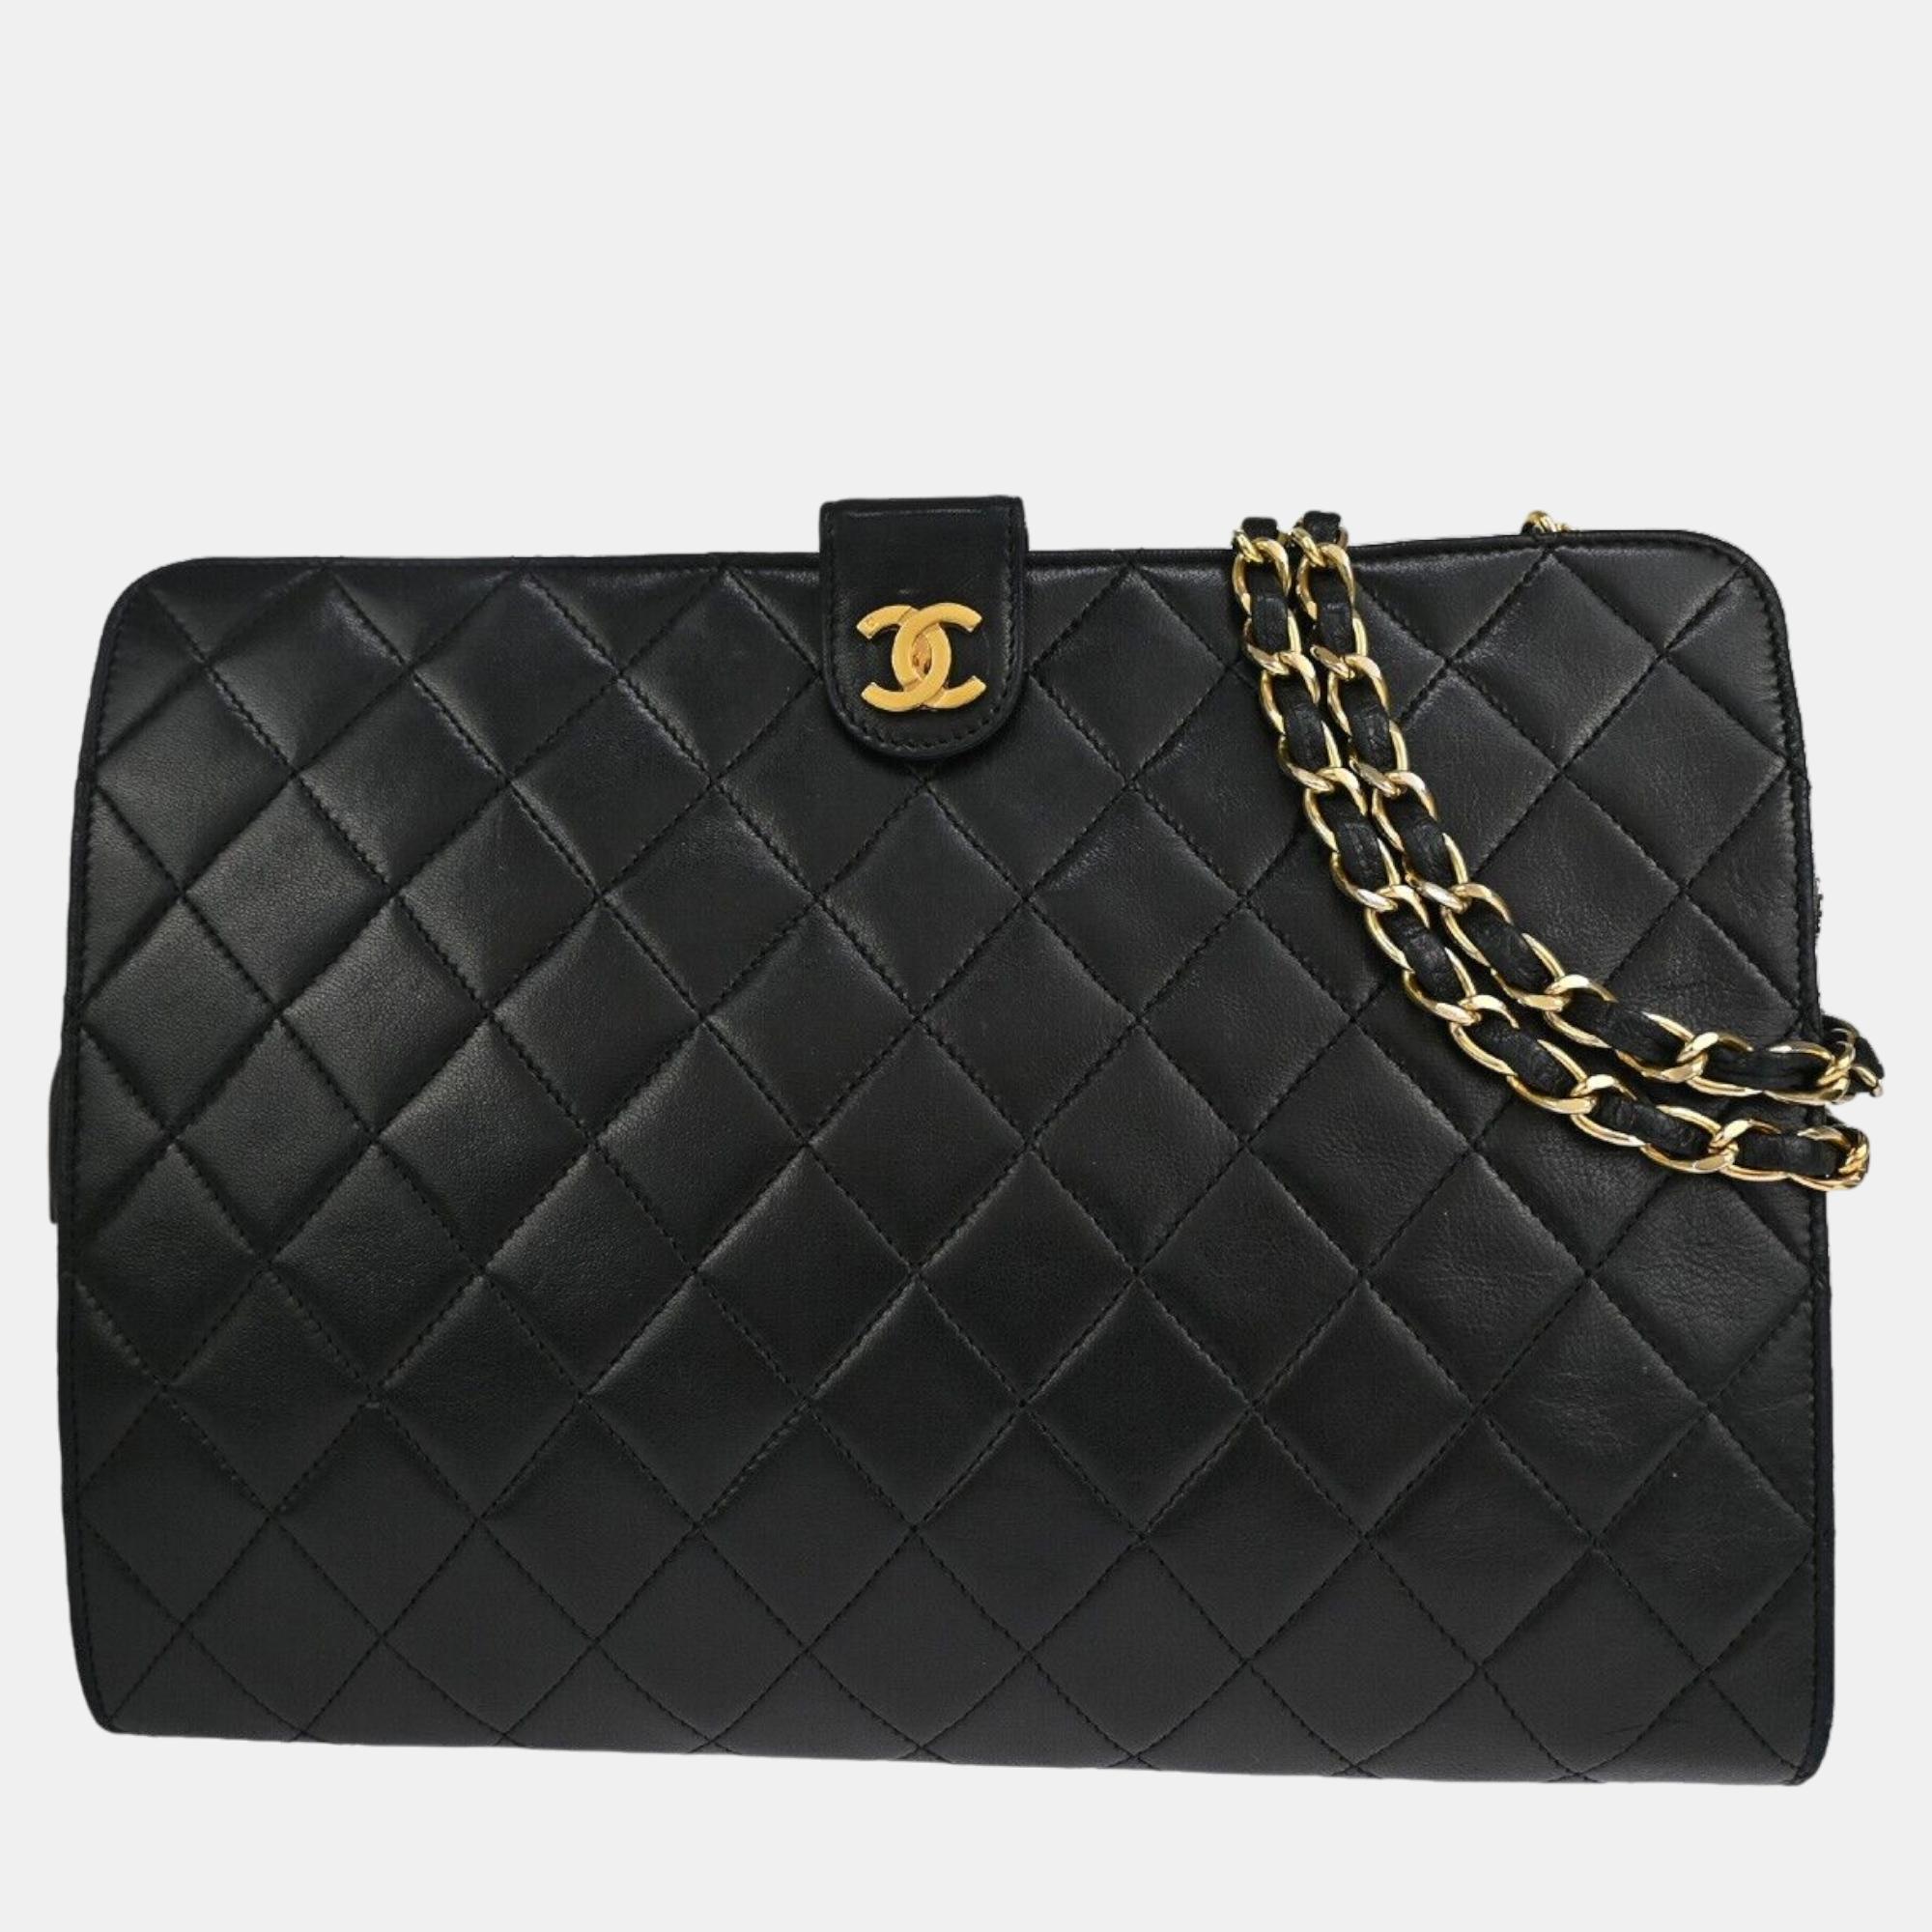 Chanel black leather quilted chain shoulder bag